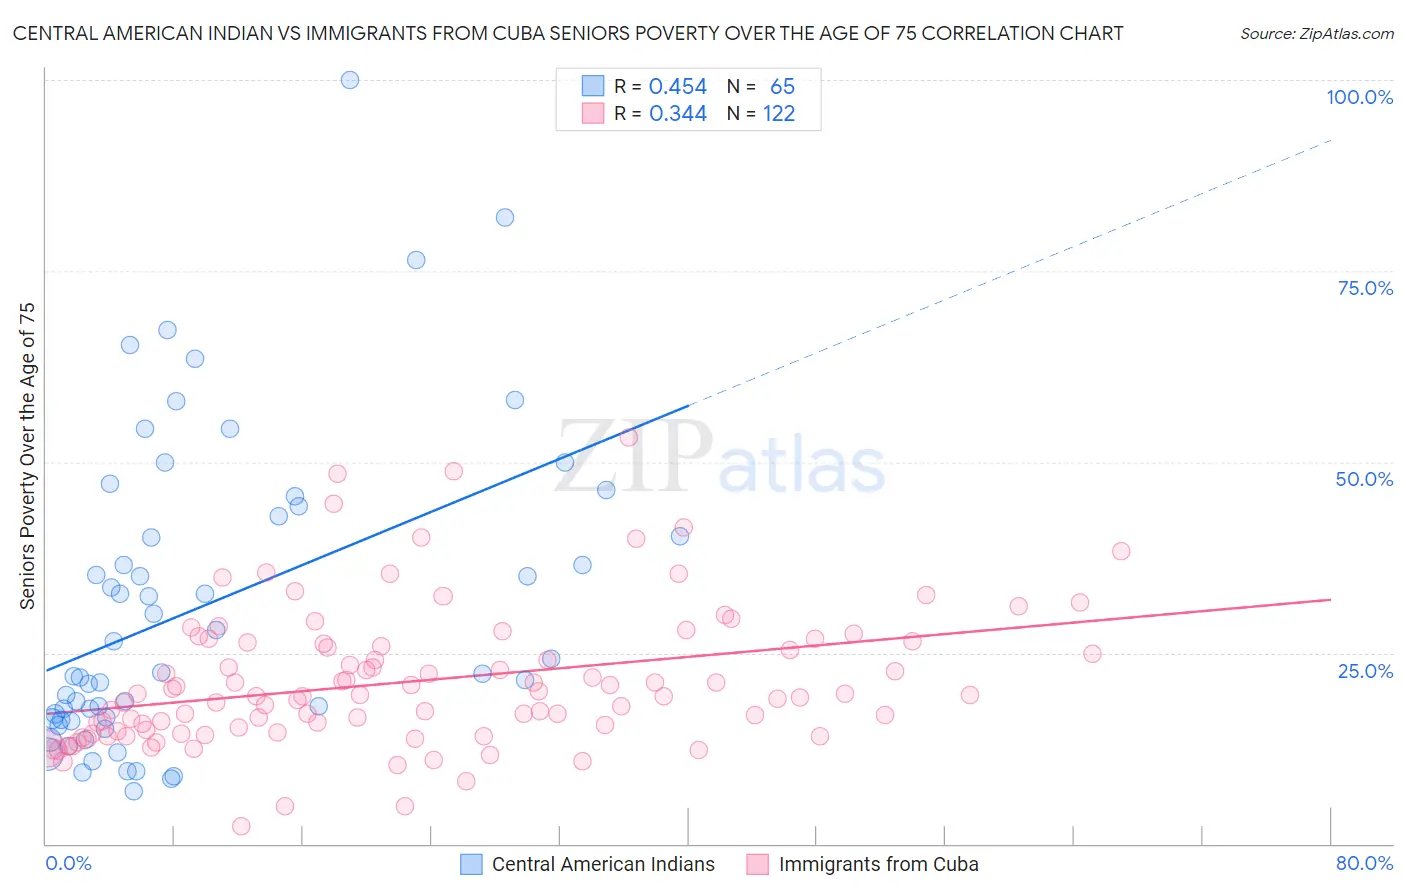 Central American Indian vs Immigrants from Cuba Seniors Poverty Over the Age of 75